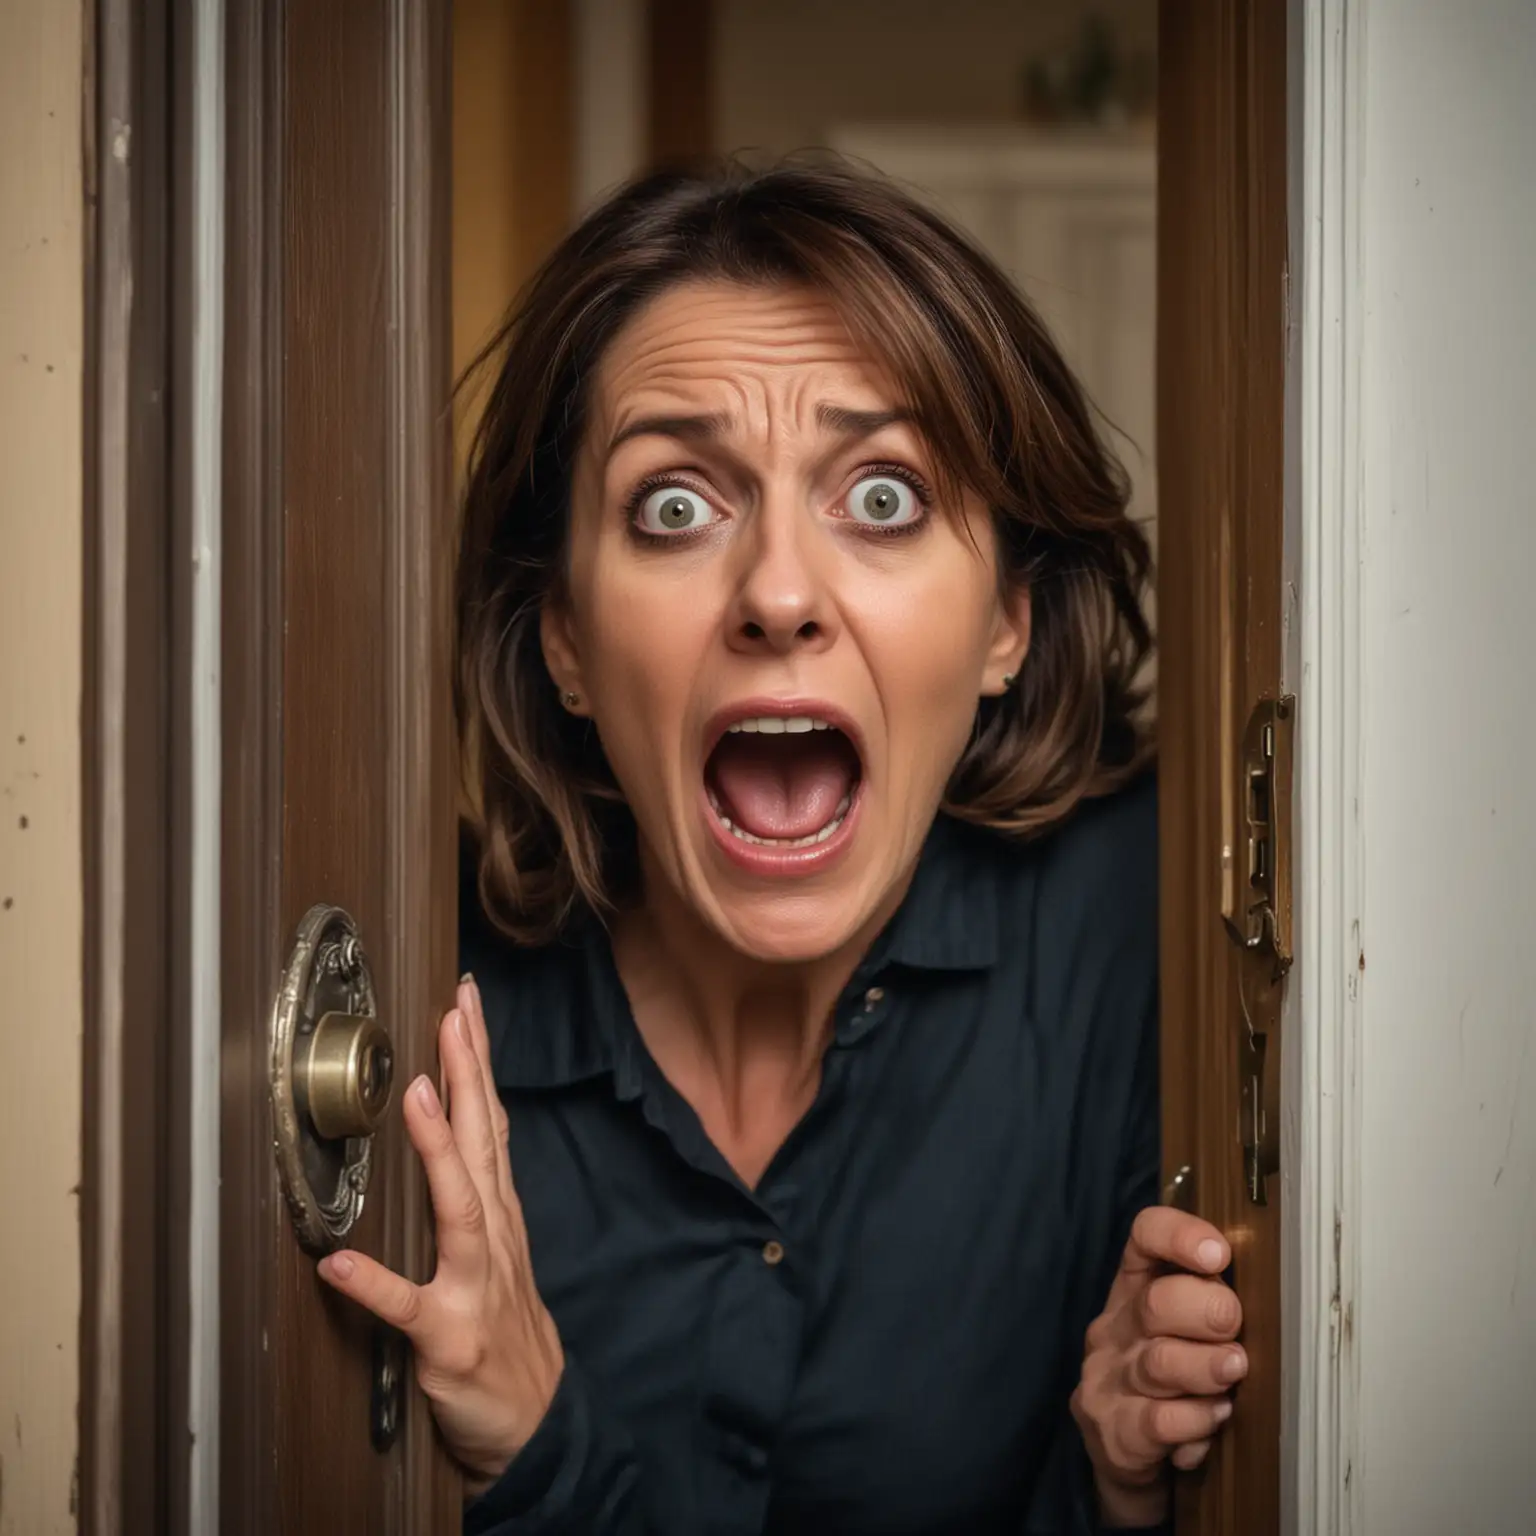 A very attractive and elegant 40-year-old woman is opening the door to her house, she is scared, you can see the terror in her eyes, she is about to scream.